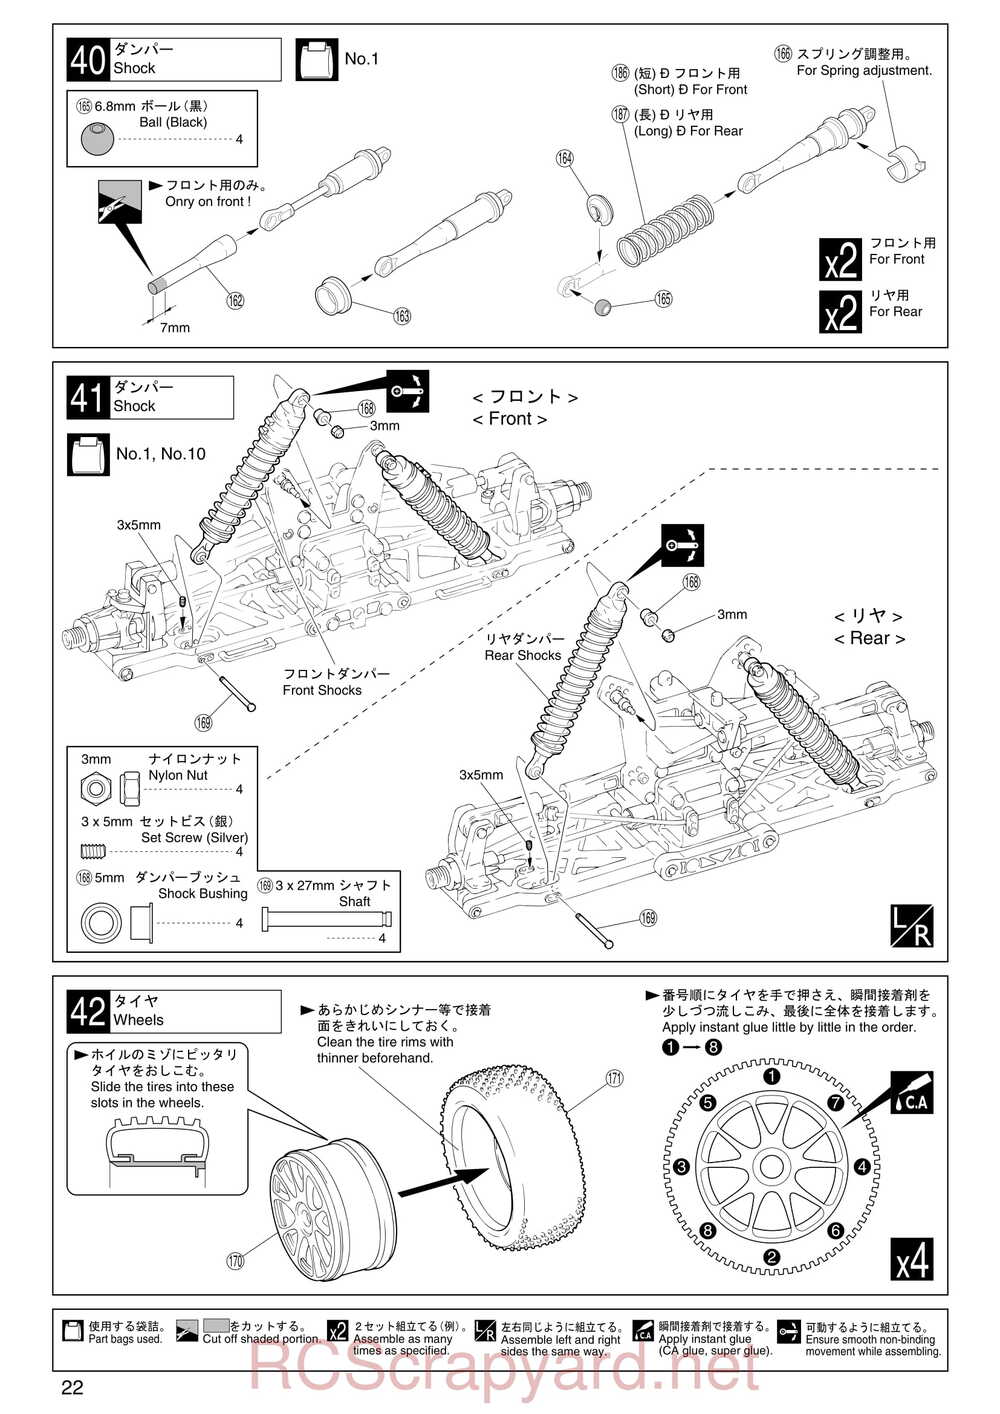 Kyosho - 31081- Inferno-MP-7-5 - Manual - Page 22